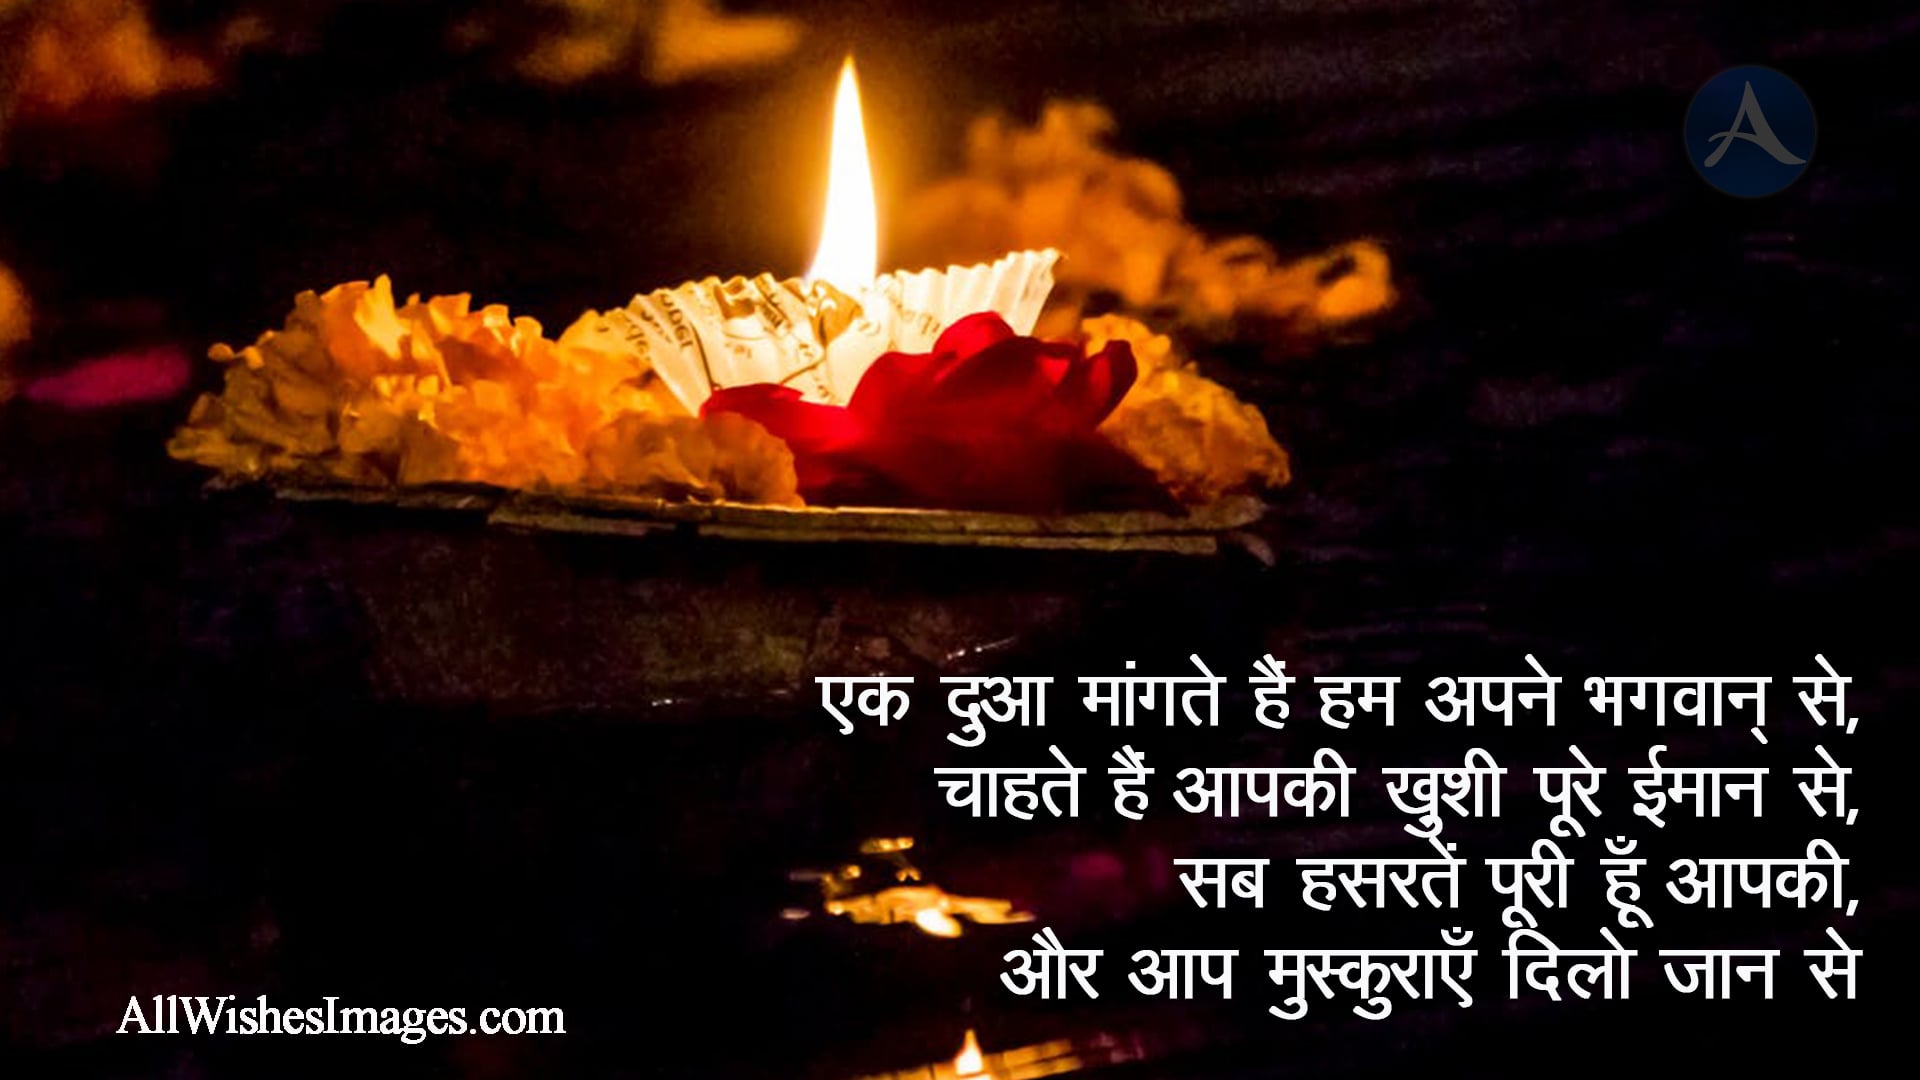 Wishing Happy Diwali Images HD Hindi - All Wishes Images - Images for  WhatsApp